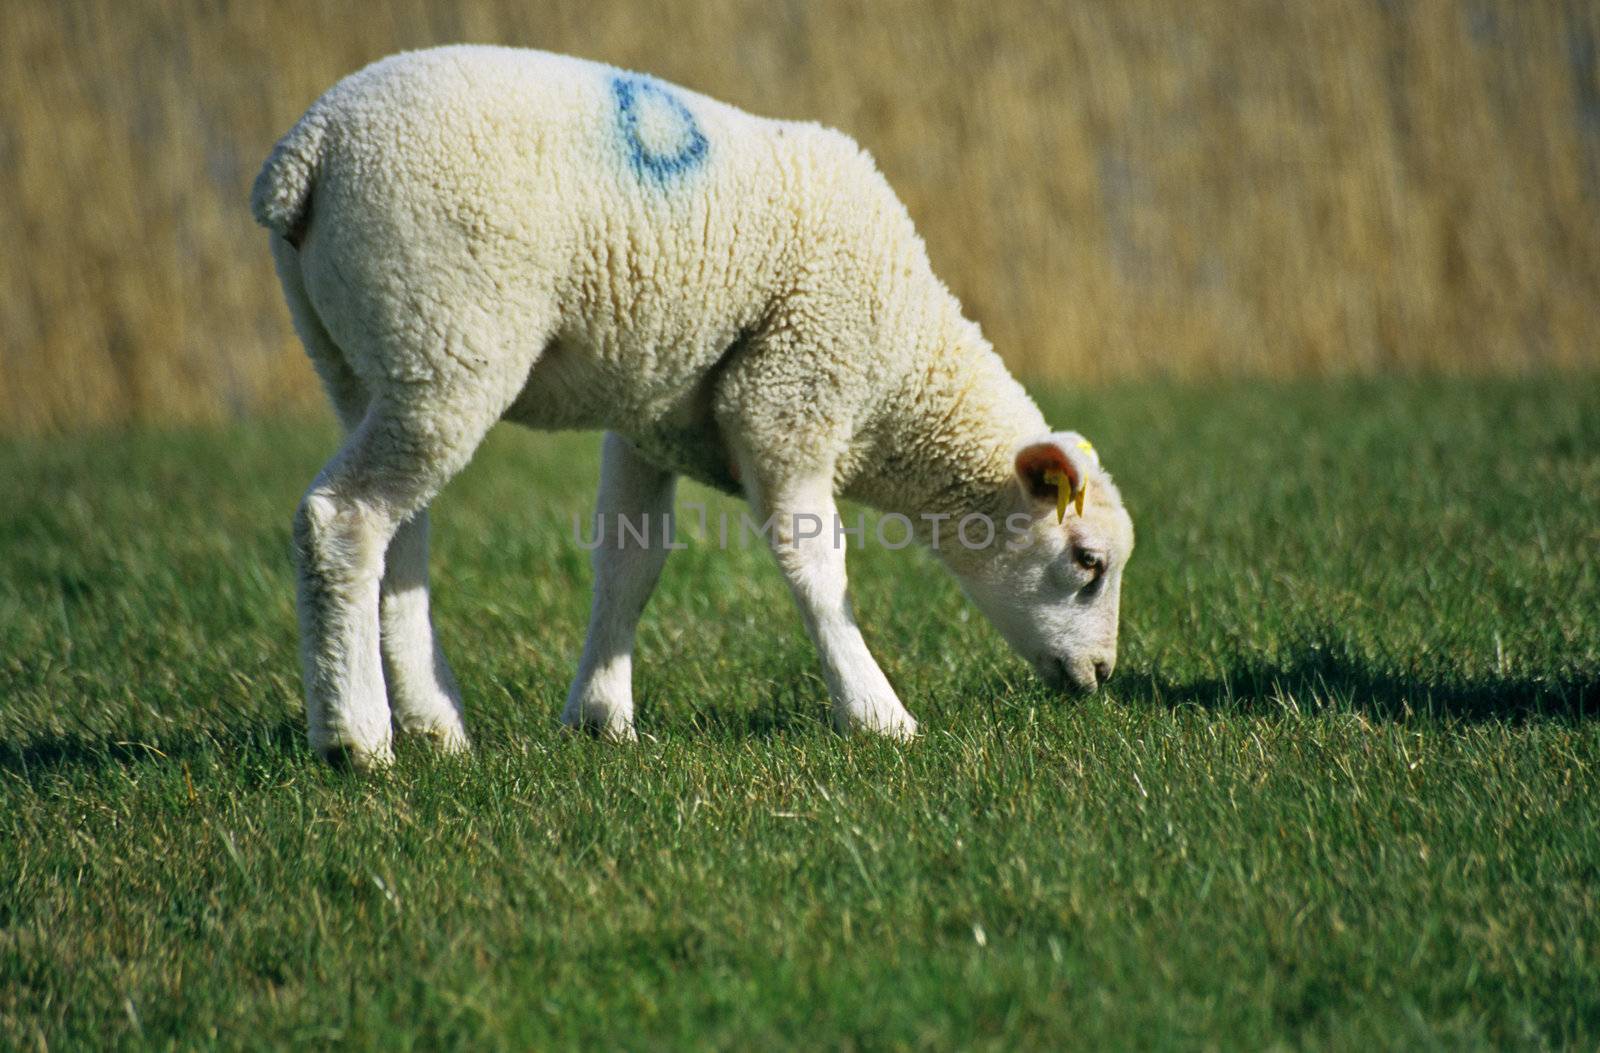 A young spring lamb munches on green grass in the Netherlands.